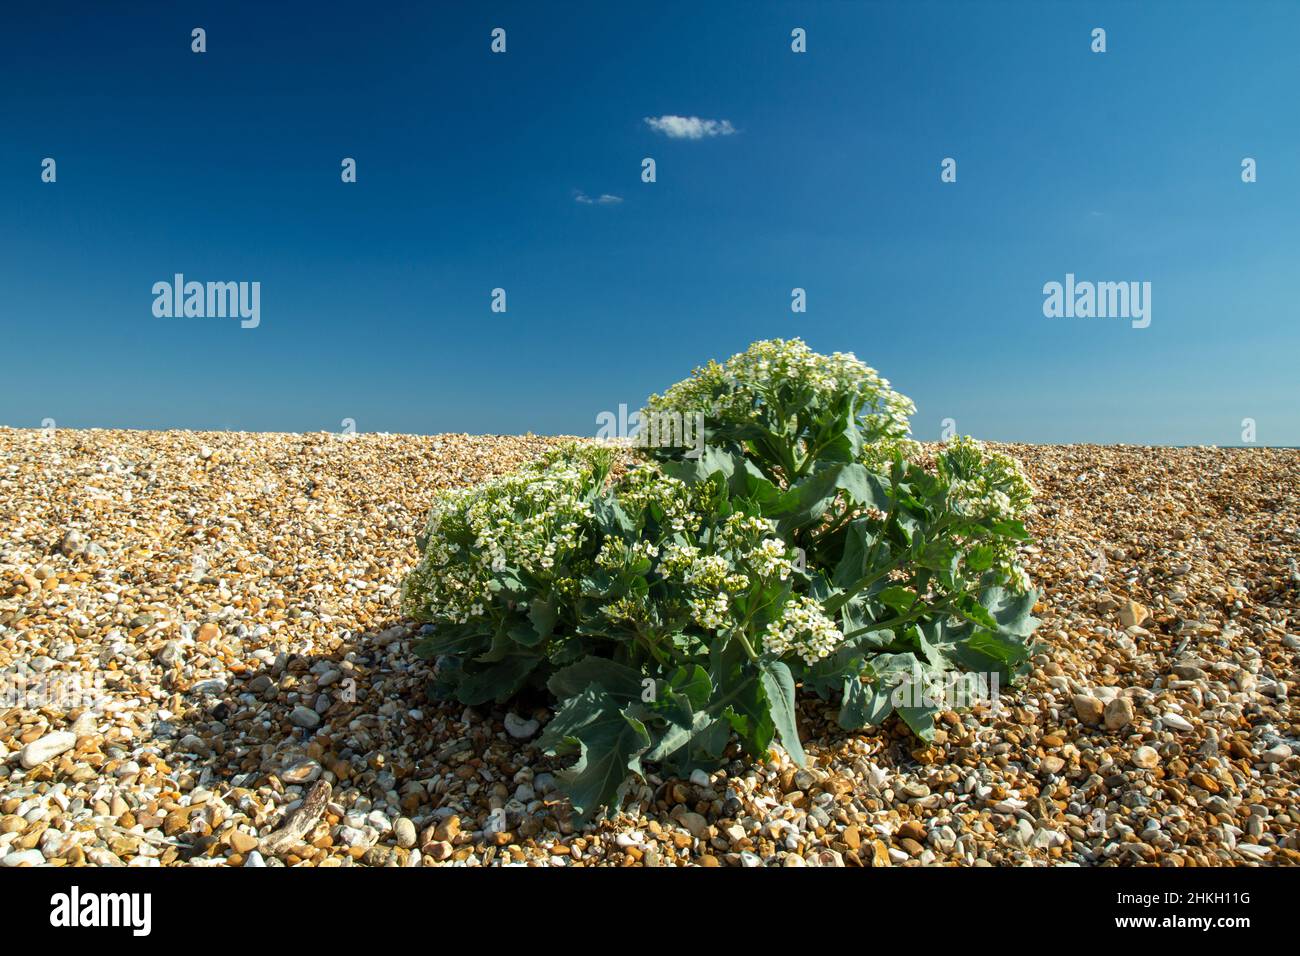 Sea Kale plant growing in pebbles on a pebble beach with clear blue sky and small wispy cloud. Stock Photo